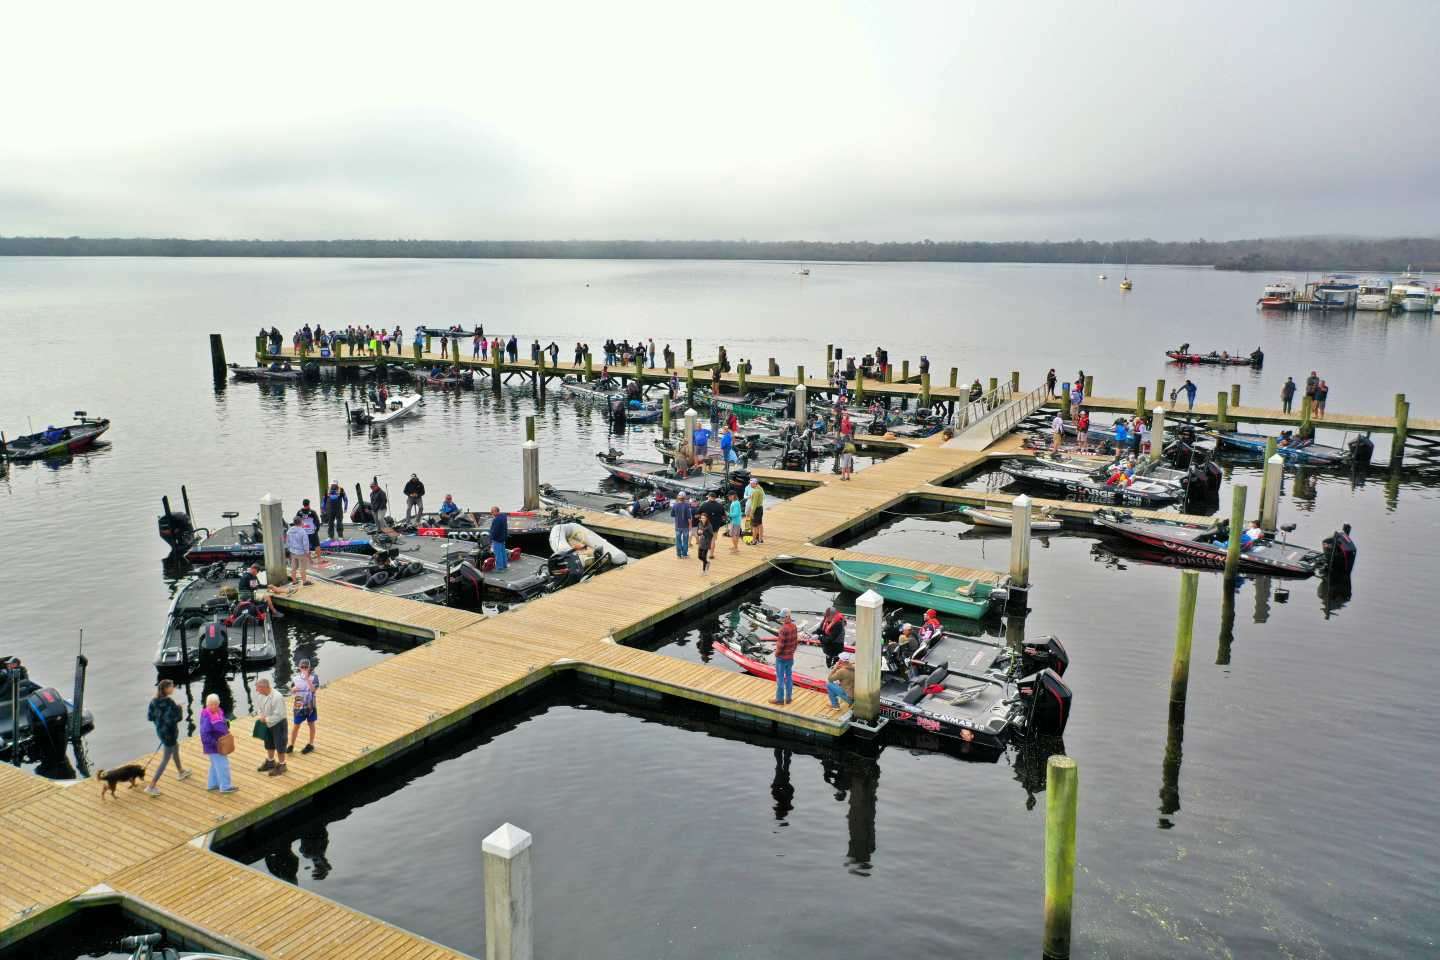 Get an eagle-eye view of takeoff on the first morning of the 2021 AFTCO Bassmaster Elite at St. Johns River!